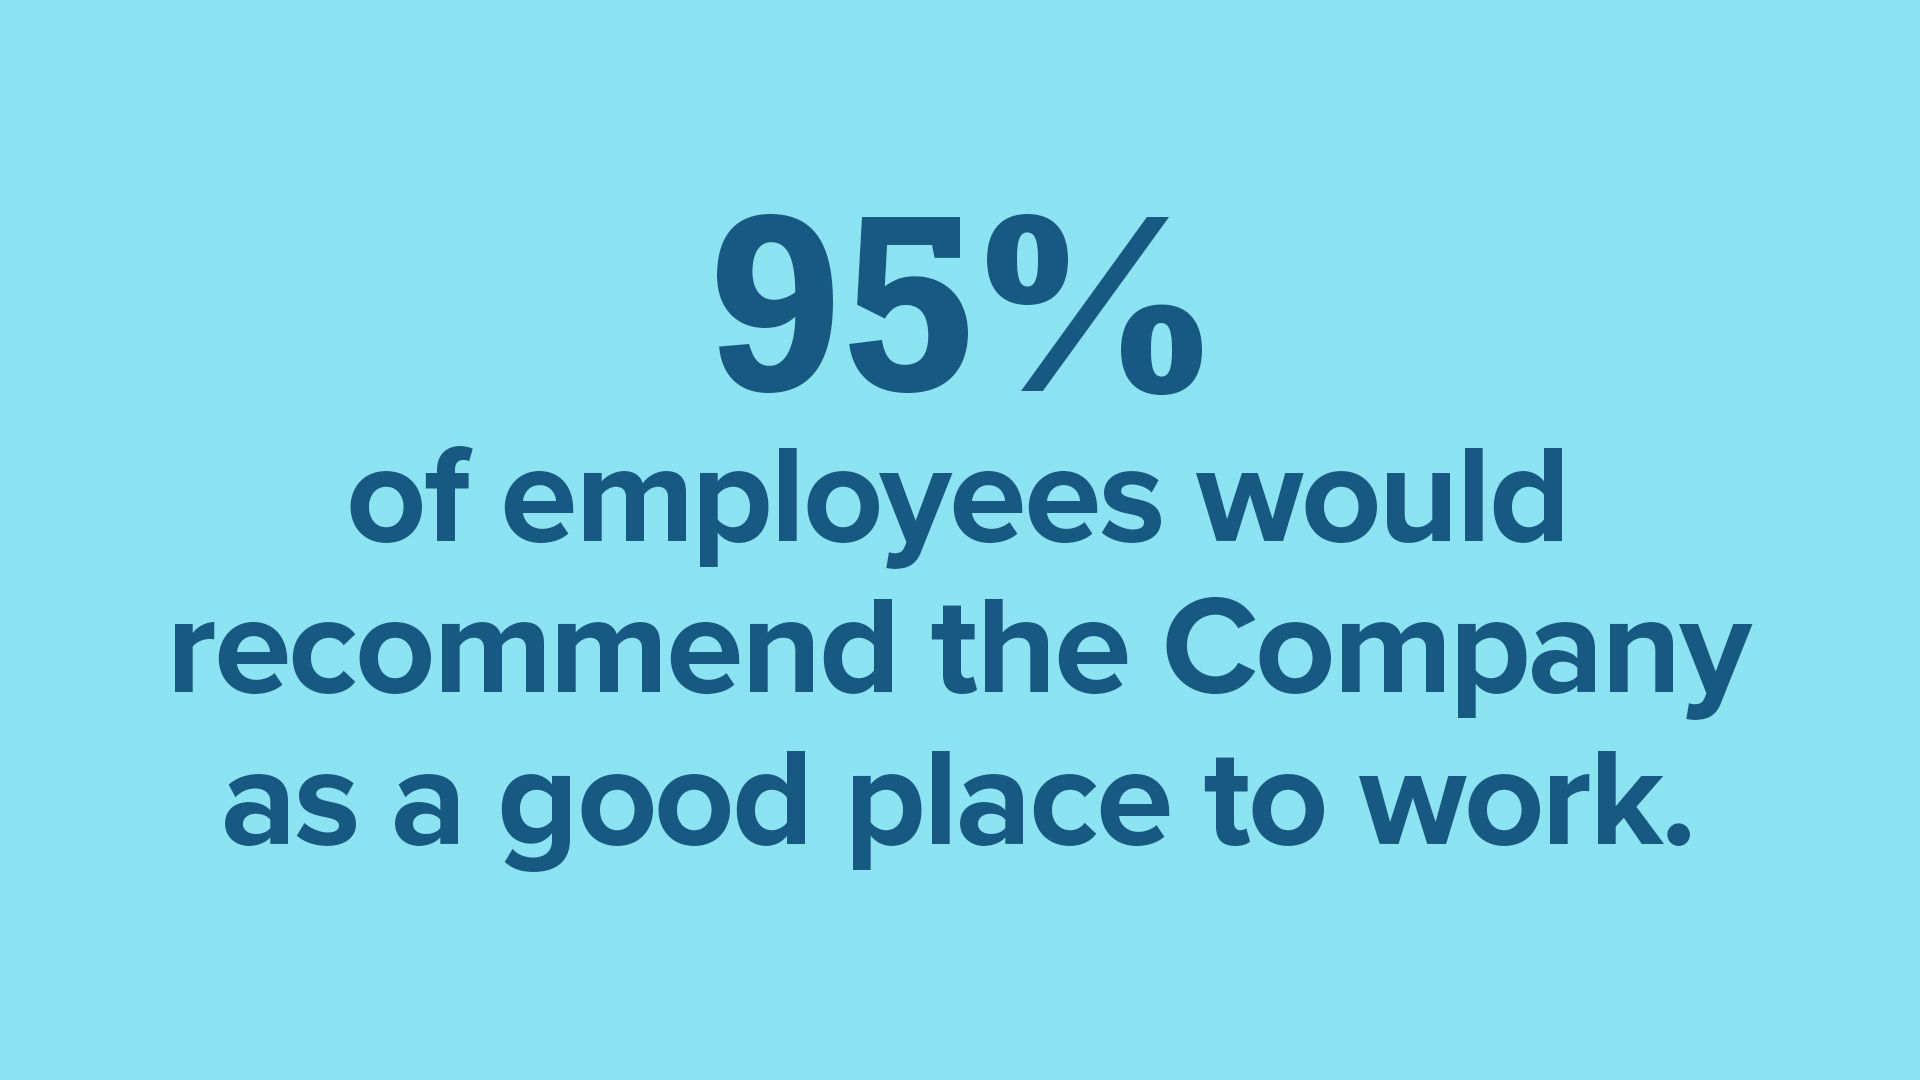 95% of employees would recommend the Company as a good place to work.